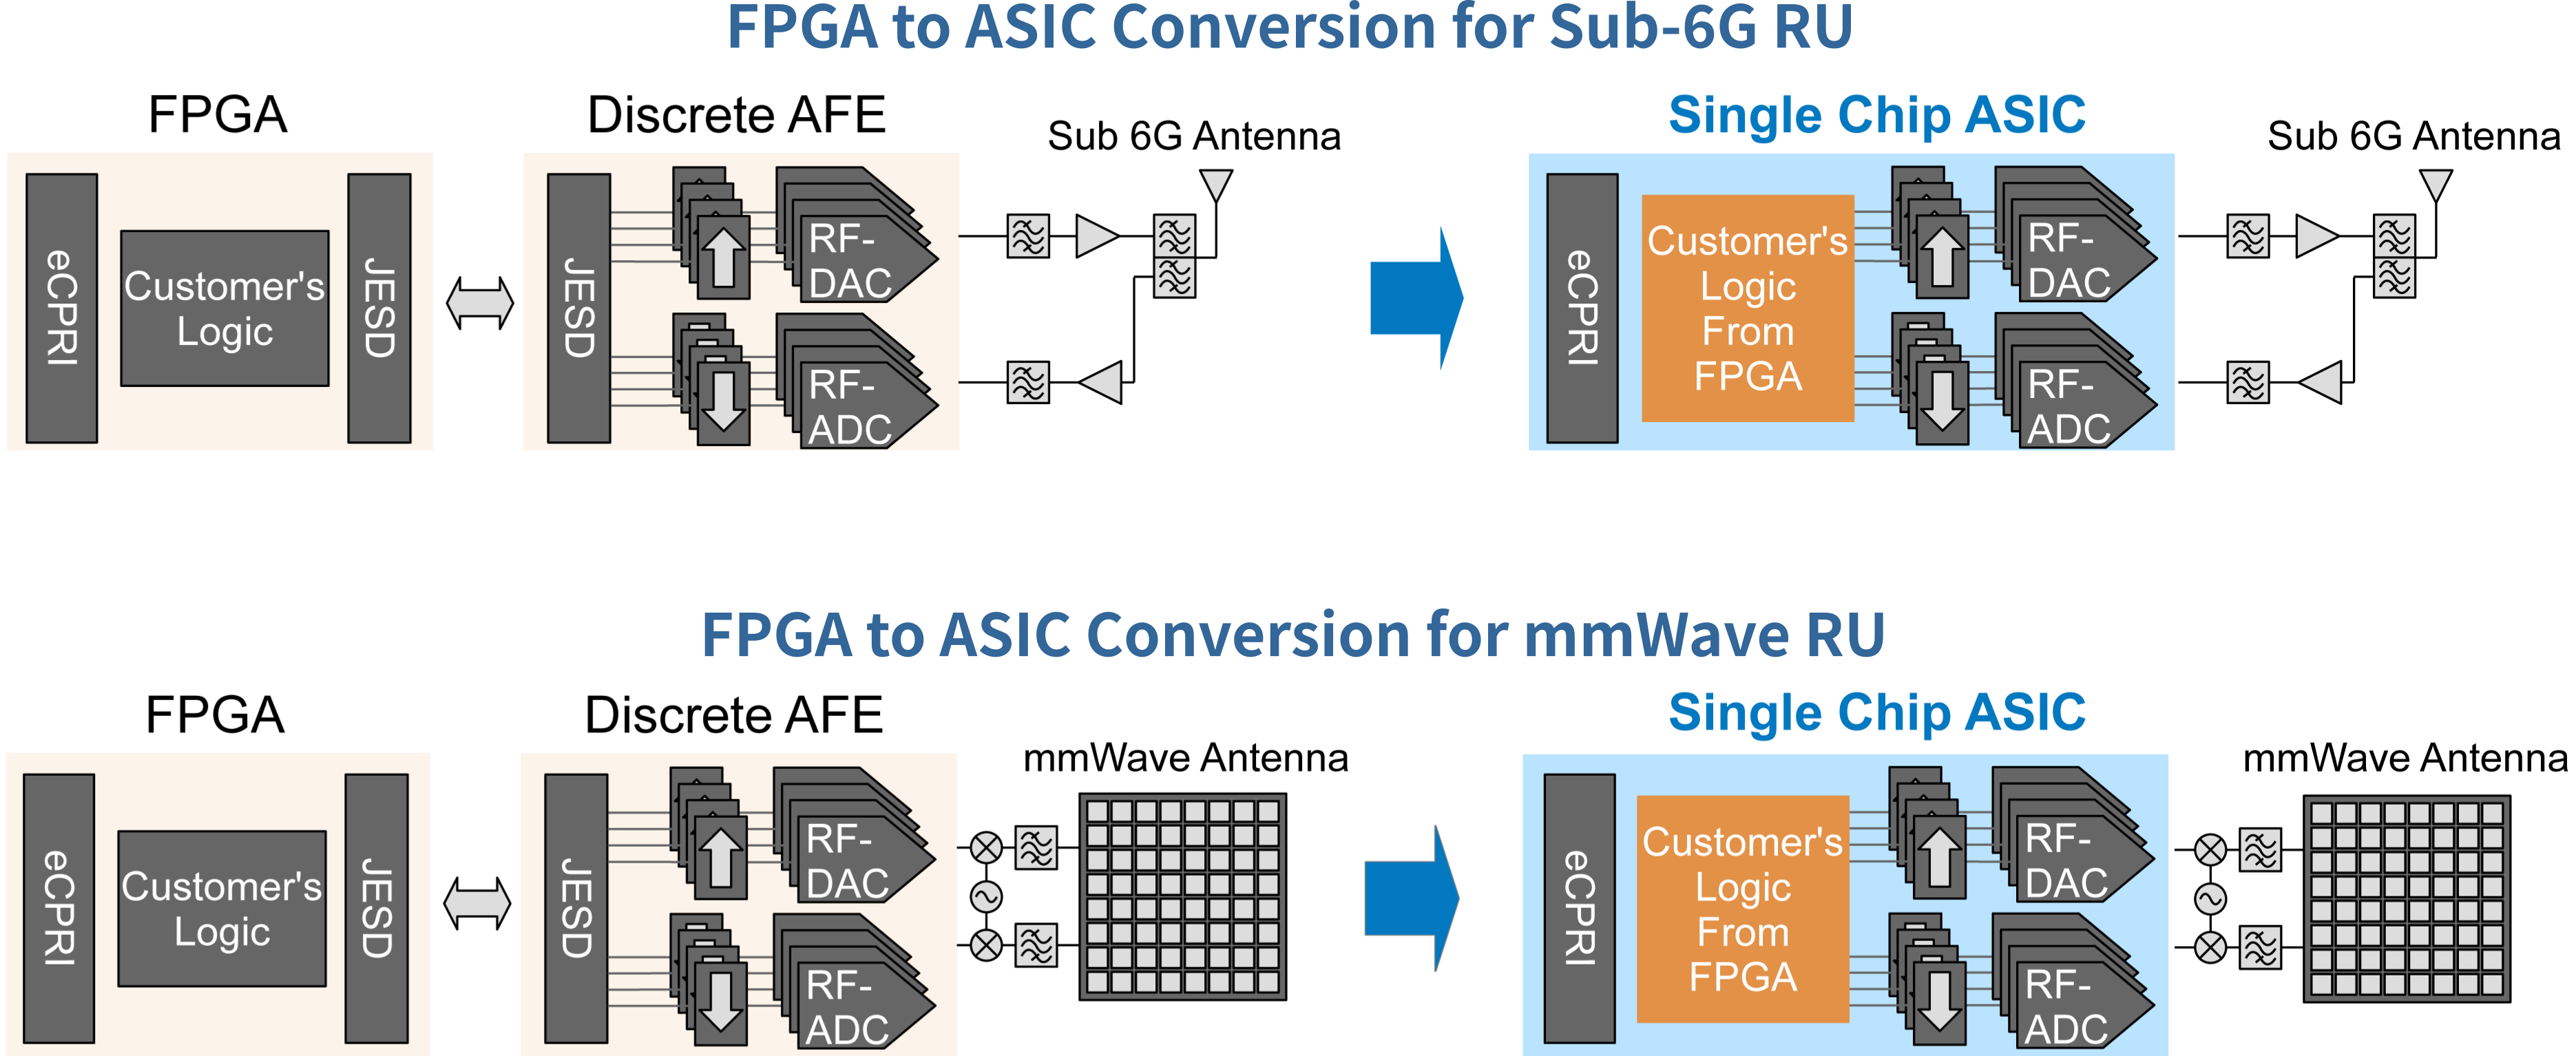 FPGA to ASIC conversion for sub 6G RU and mmWave RU